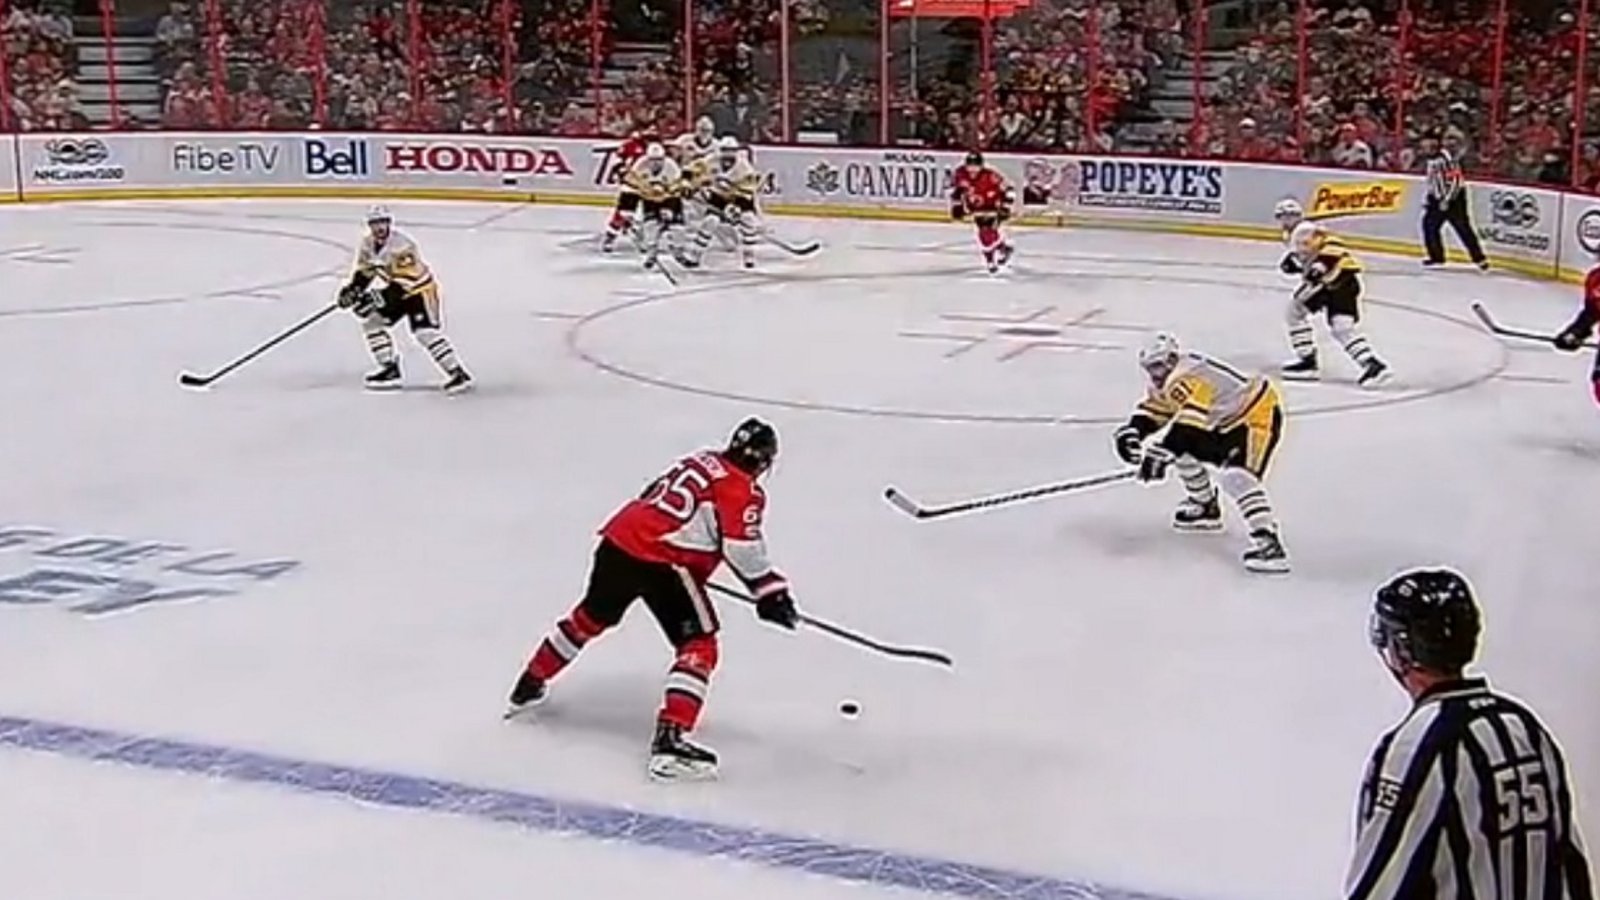 Karlsson's shot deflects three times before going in. 